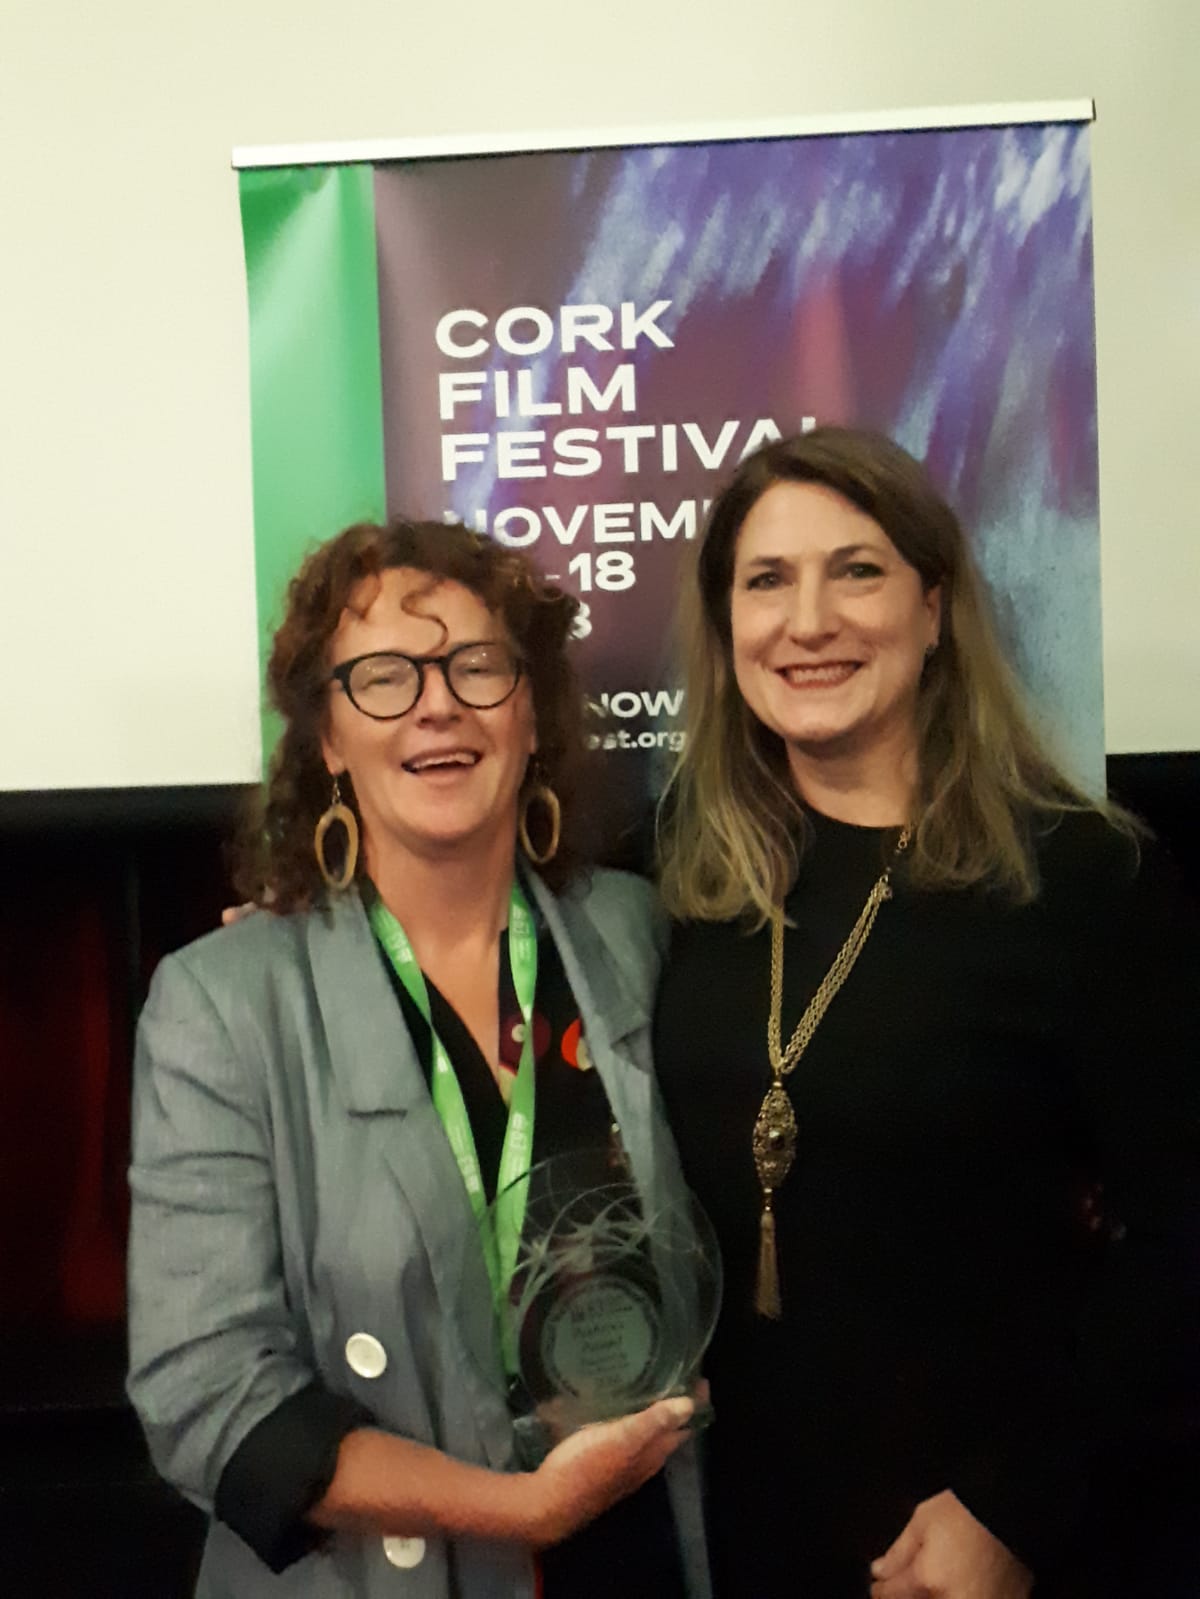 Float Like a Butterfly director Carmel Winters with Cork Film Festival CEO and Festival Producer Fiona Clark